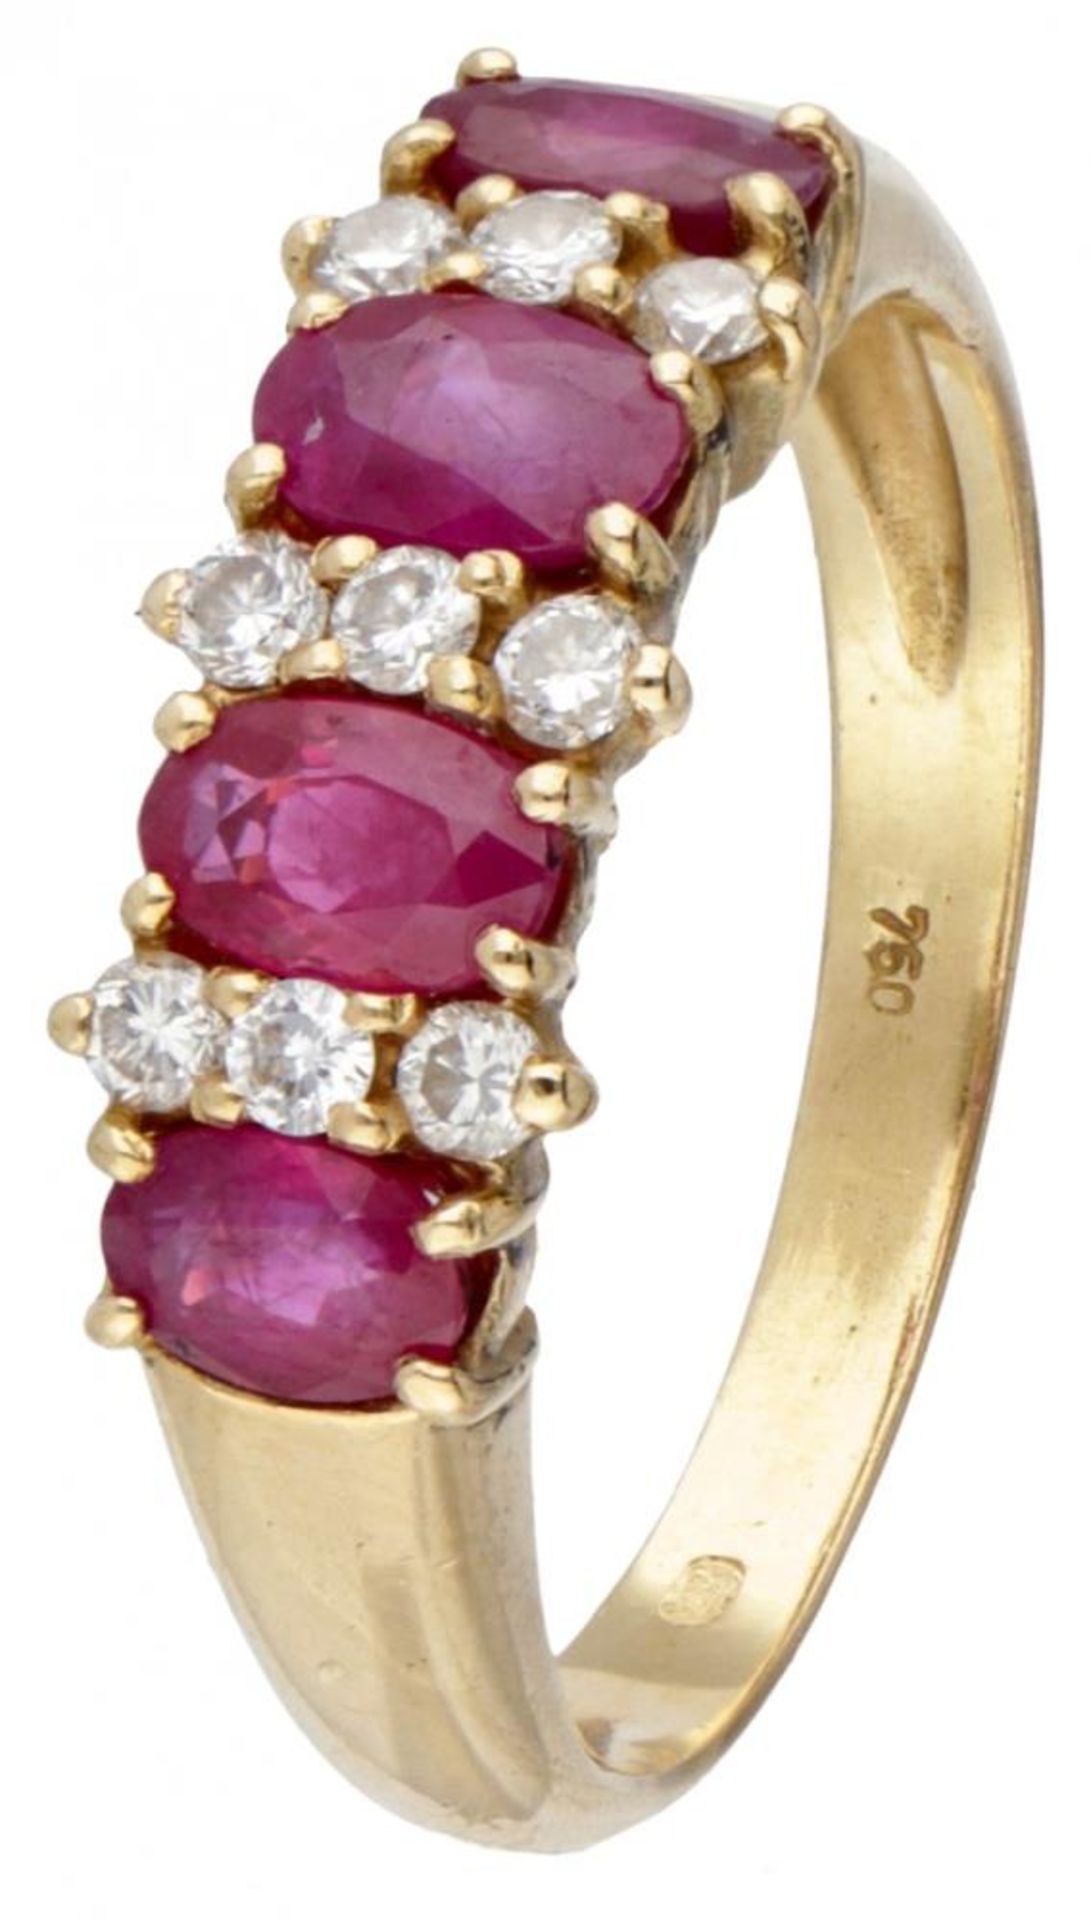 18K. Yellow gold ring set with approx. 0.18 ct. diamond and approx. 1.28 ct. ruby.